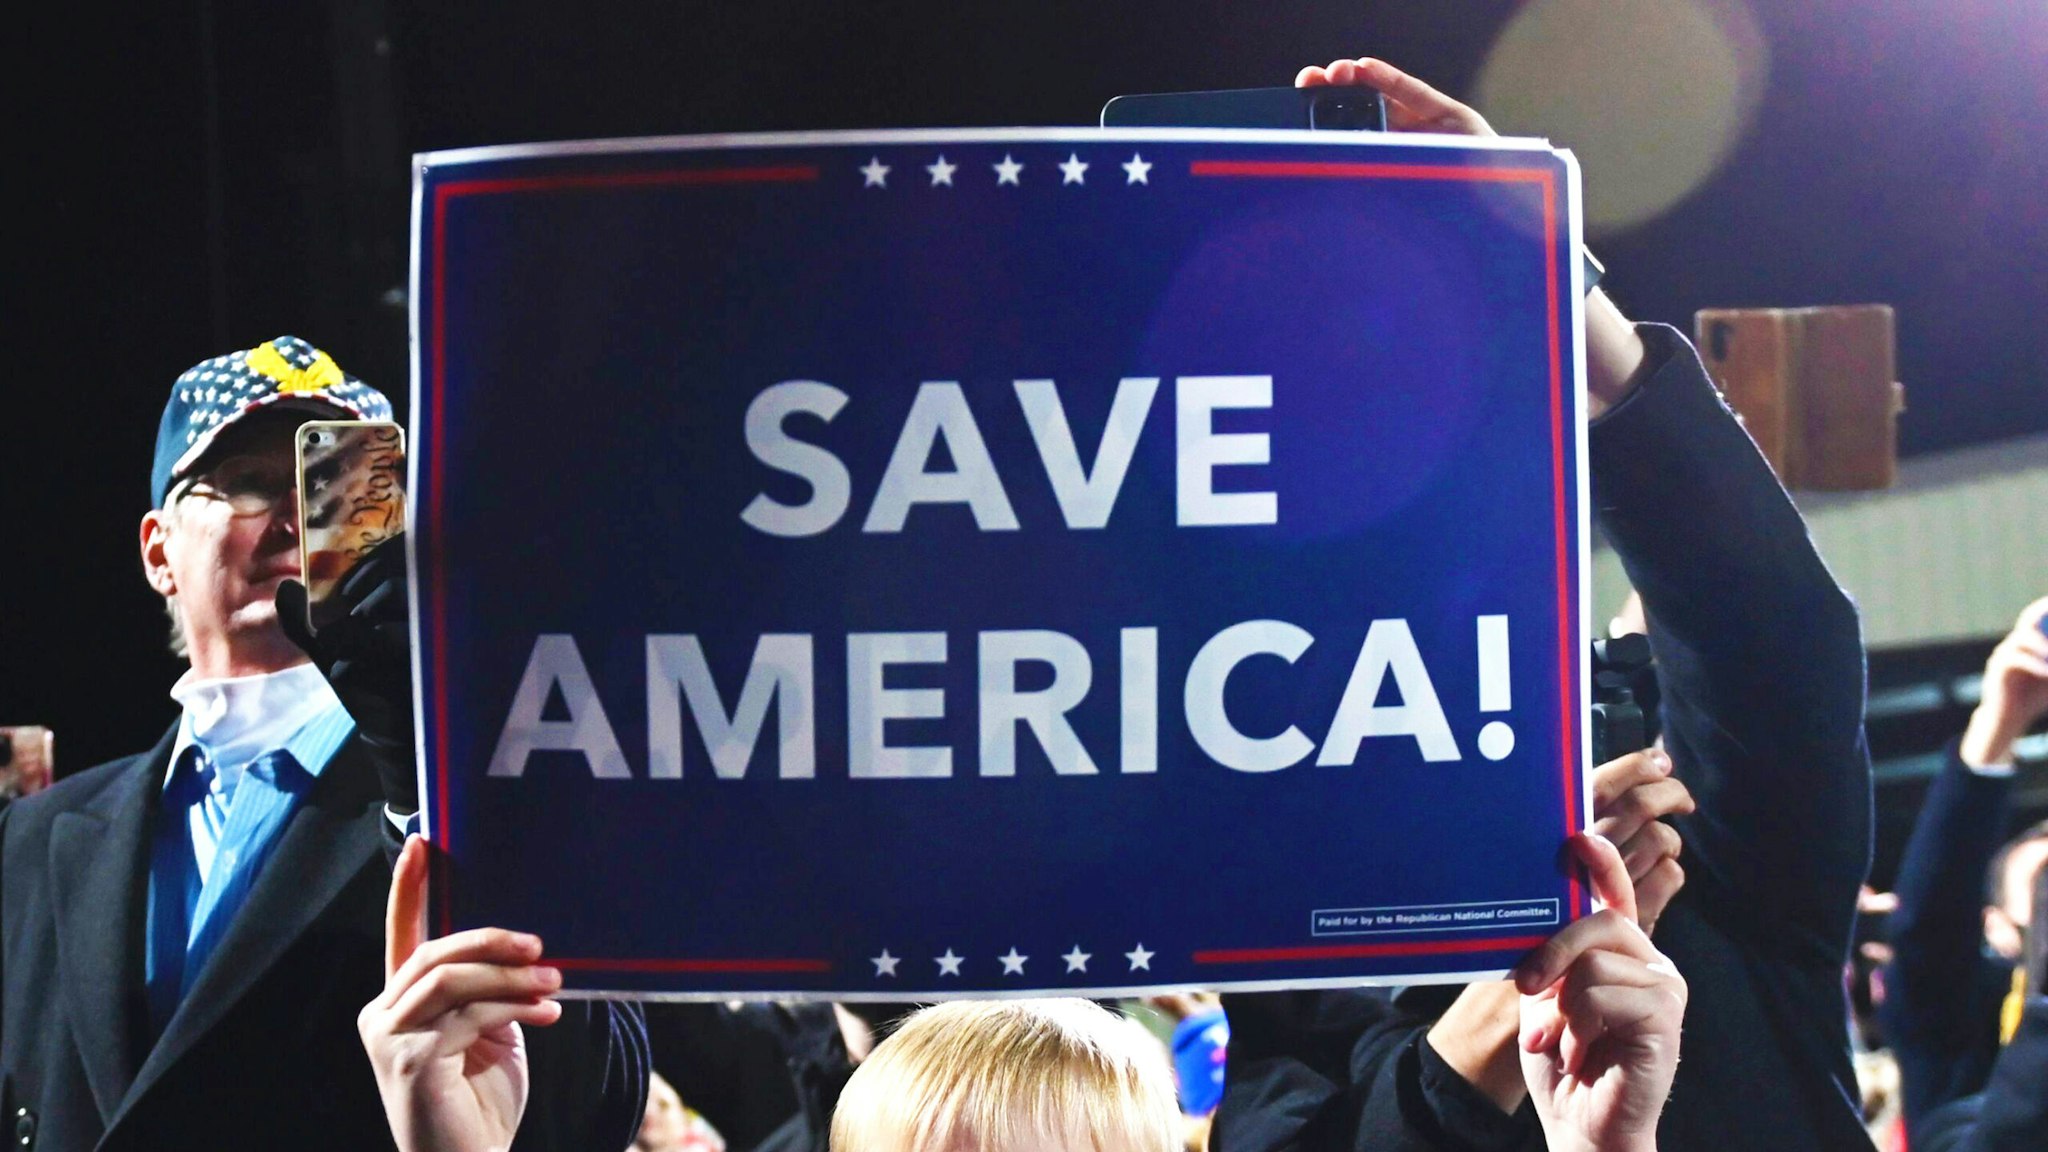 A boy holds a "Save America" sign as US president Donald Trump speaks at a rally to support Republican Senate candidates at Valdosta Regional Airport in Valdosta, Georgia on December 5, 2020. - President Donald Trump ventures out of Washington on Saturday for his first political appearance since his election defeat to Joe Biden, campaigning in Georgia where two run-off races will decide the fate of the US Senate.